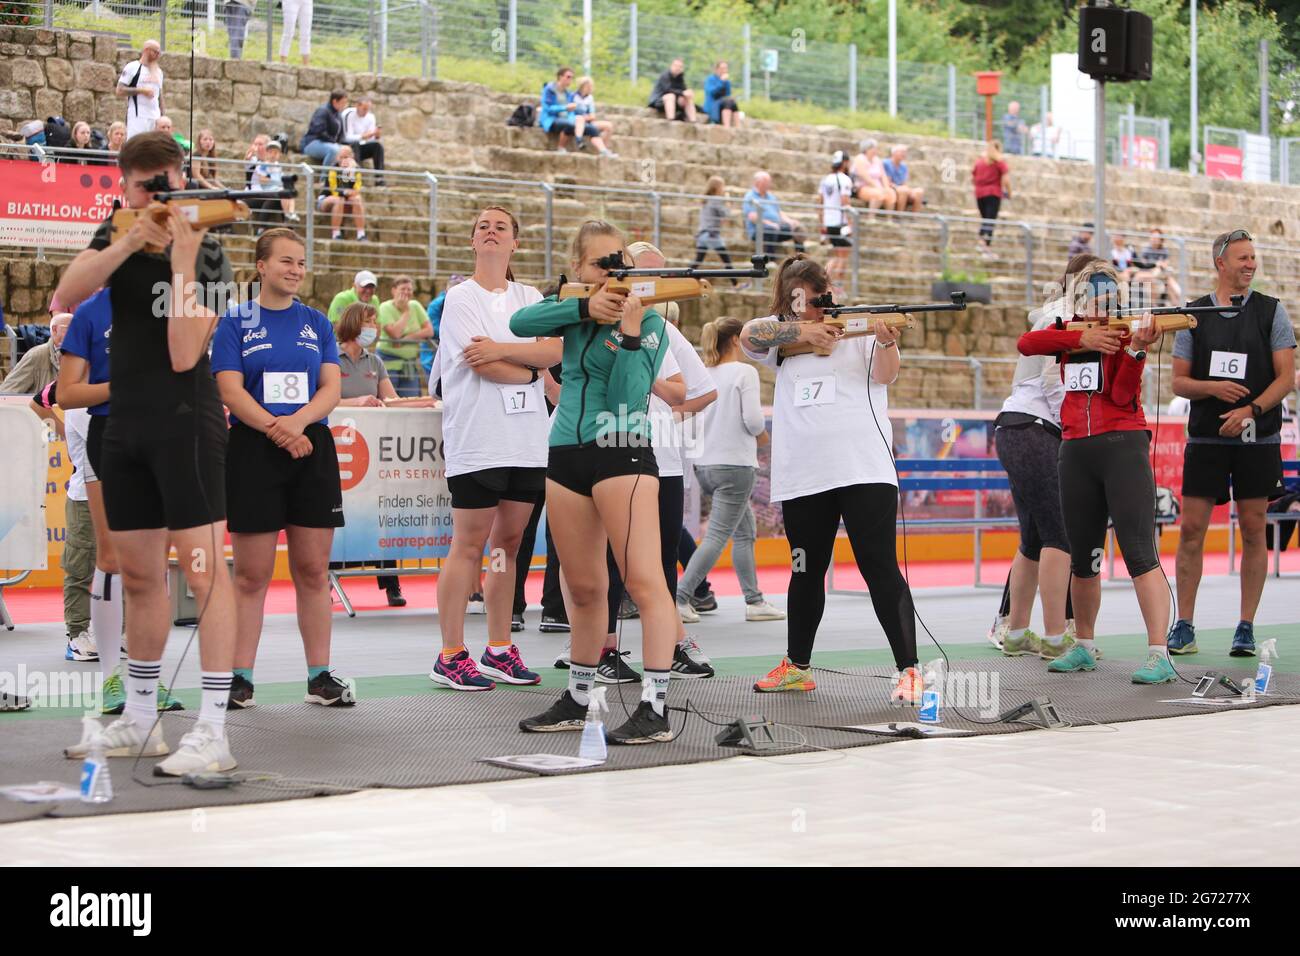 Schierke, Germany. 10th July, 2021. Participants of the Biathlon Challenge  during the competition in the Schierker Feuerstein Arena. This year's Biathlon  Challenge marked the start of events with an audience in the